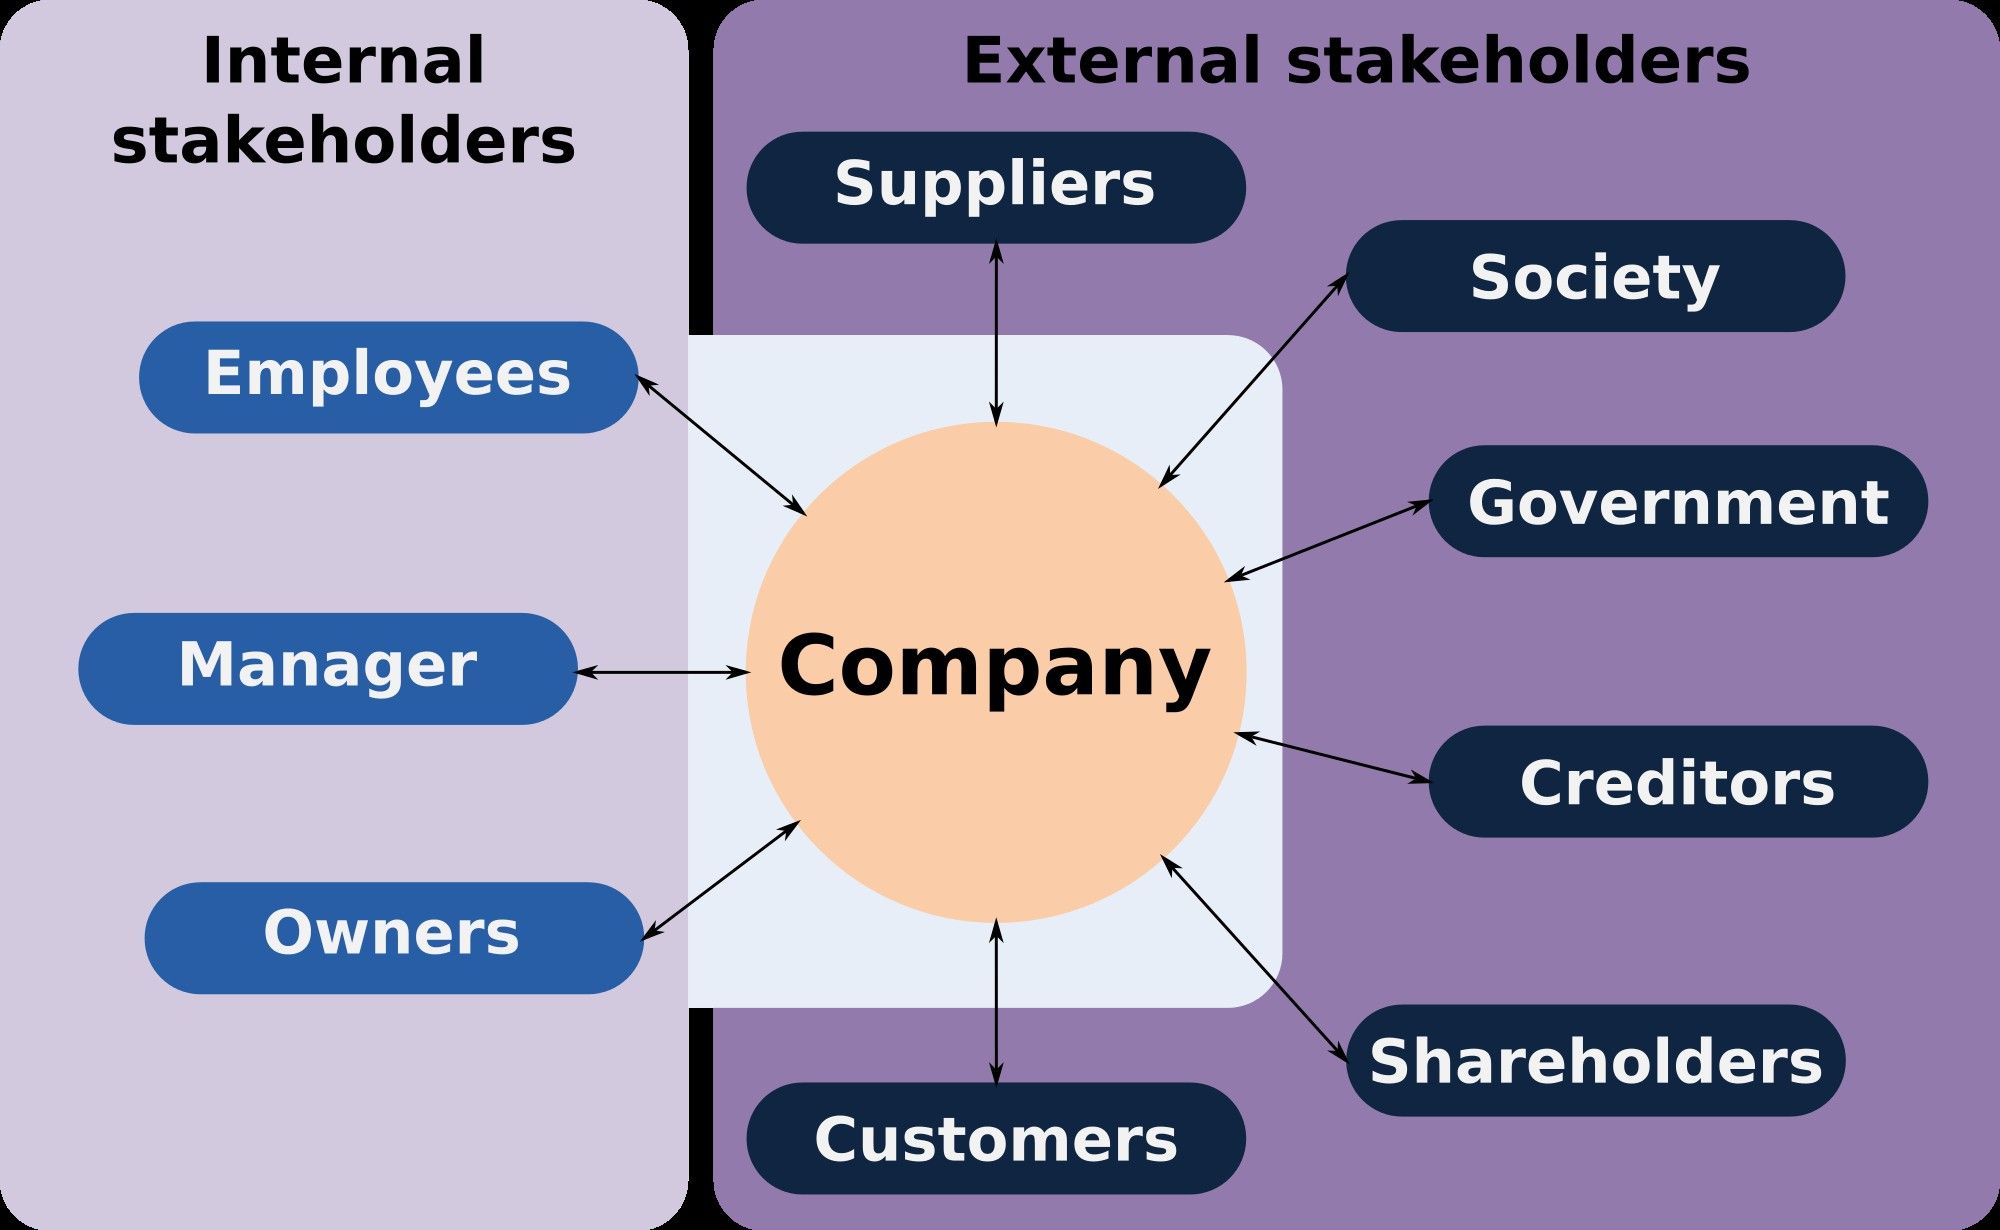 what is a secondary stakeholder